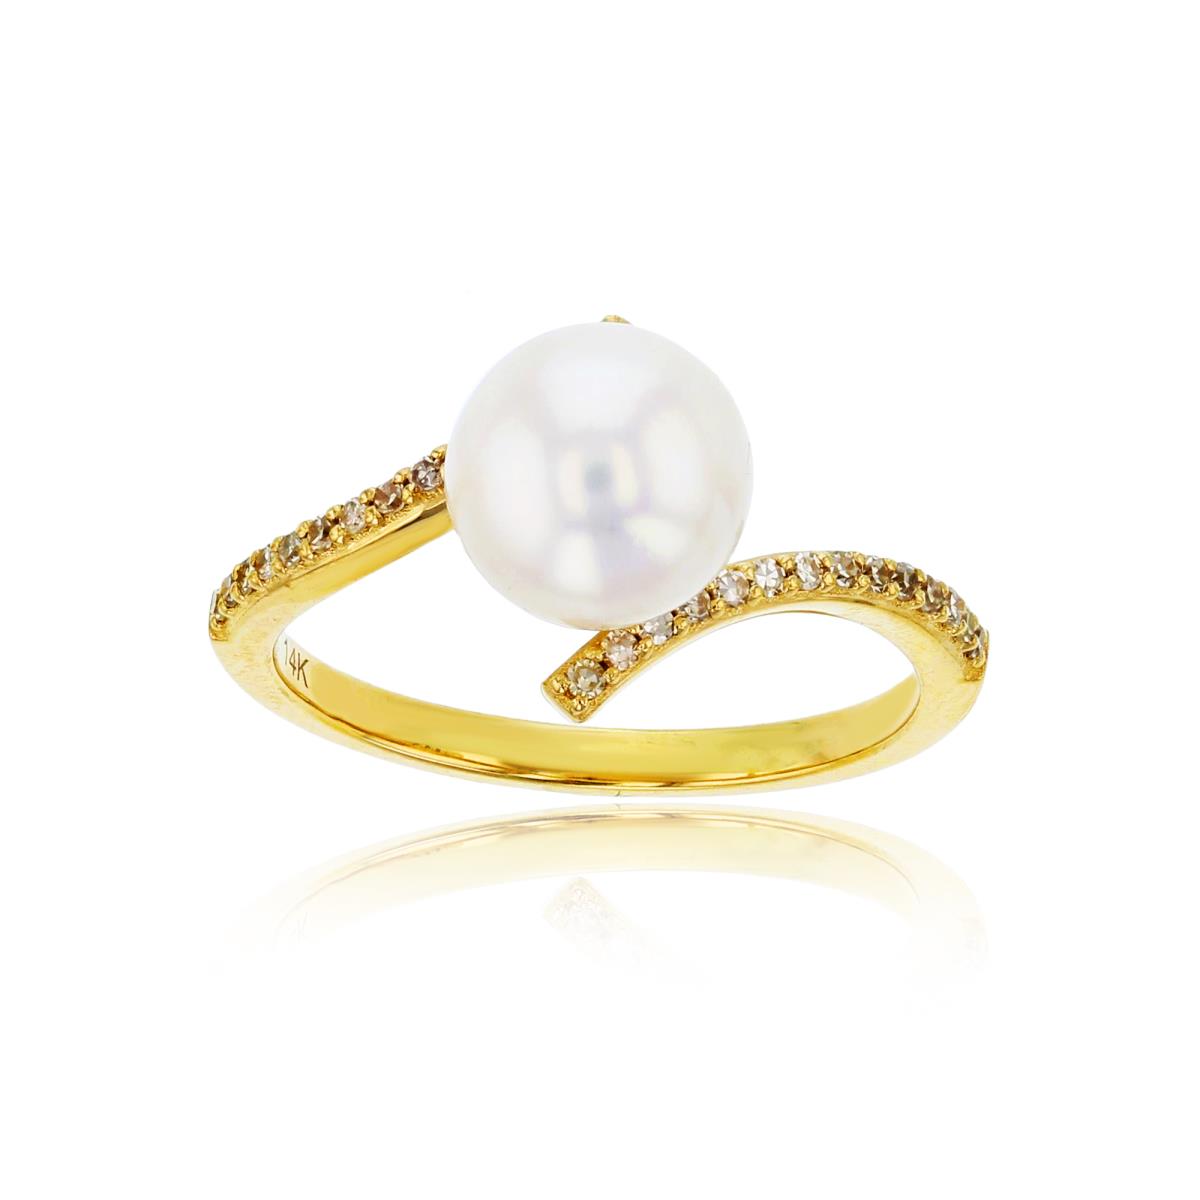 10K Yellow Gold 0.14 CTTW Rnd Diamonds & 8mm Rnd White Pearl Bypass Rows Ring